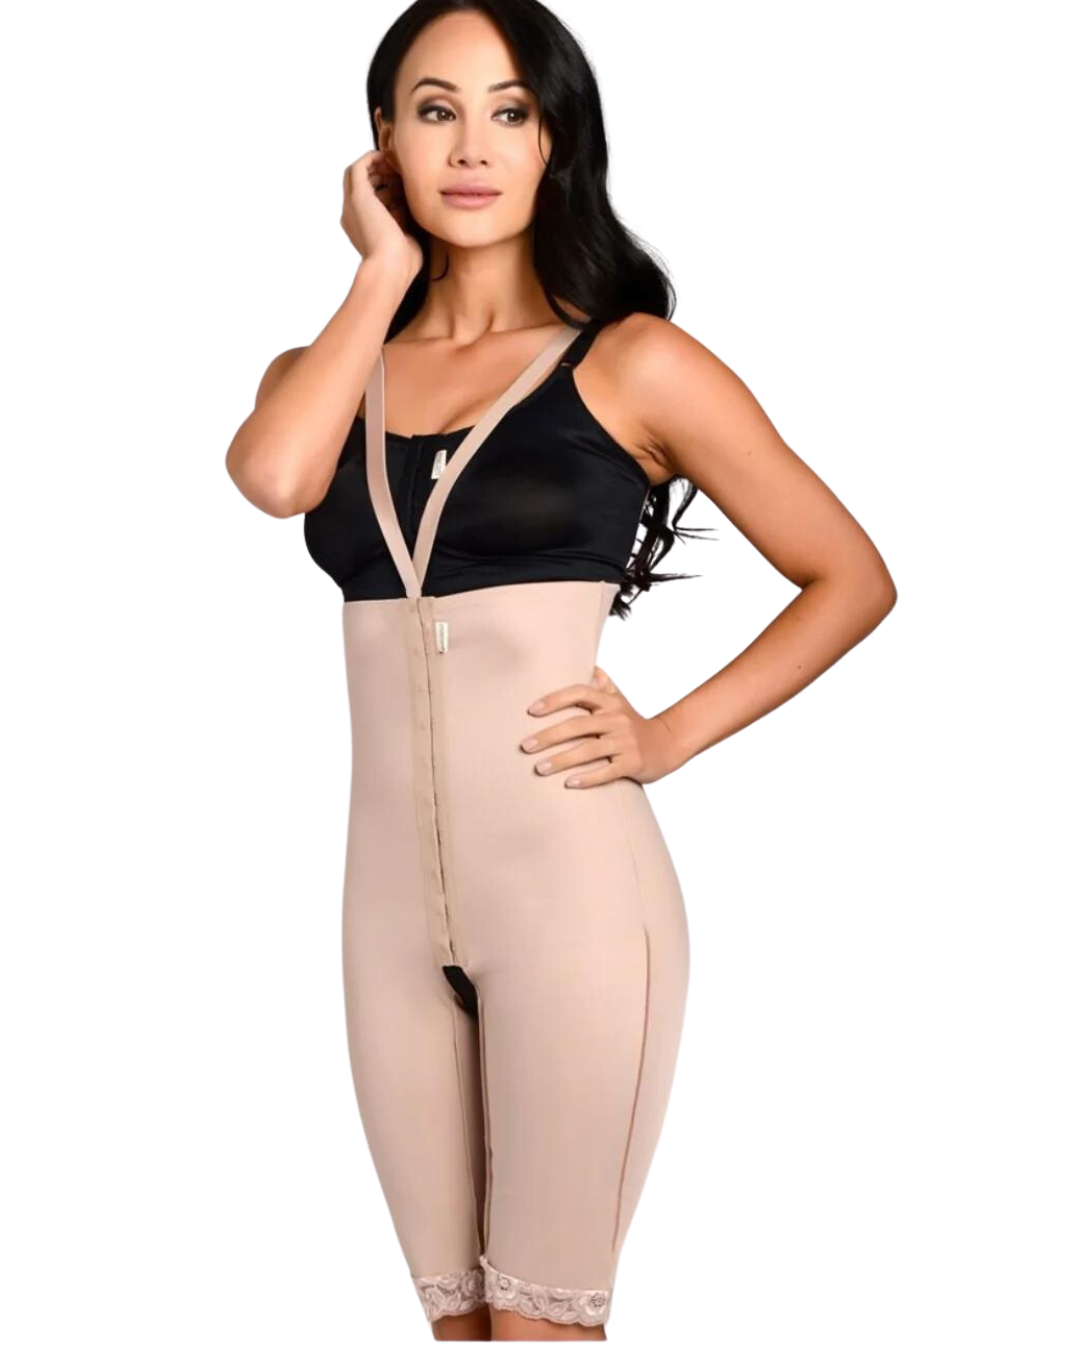 Macom Medical High waisted Girdle with shorts suitable for abdominal surgeries and liposuction 